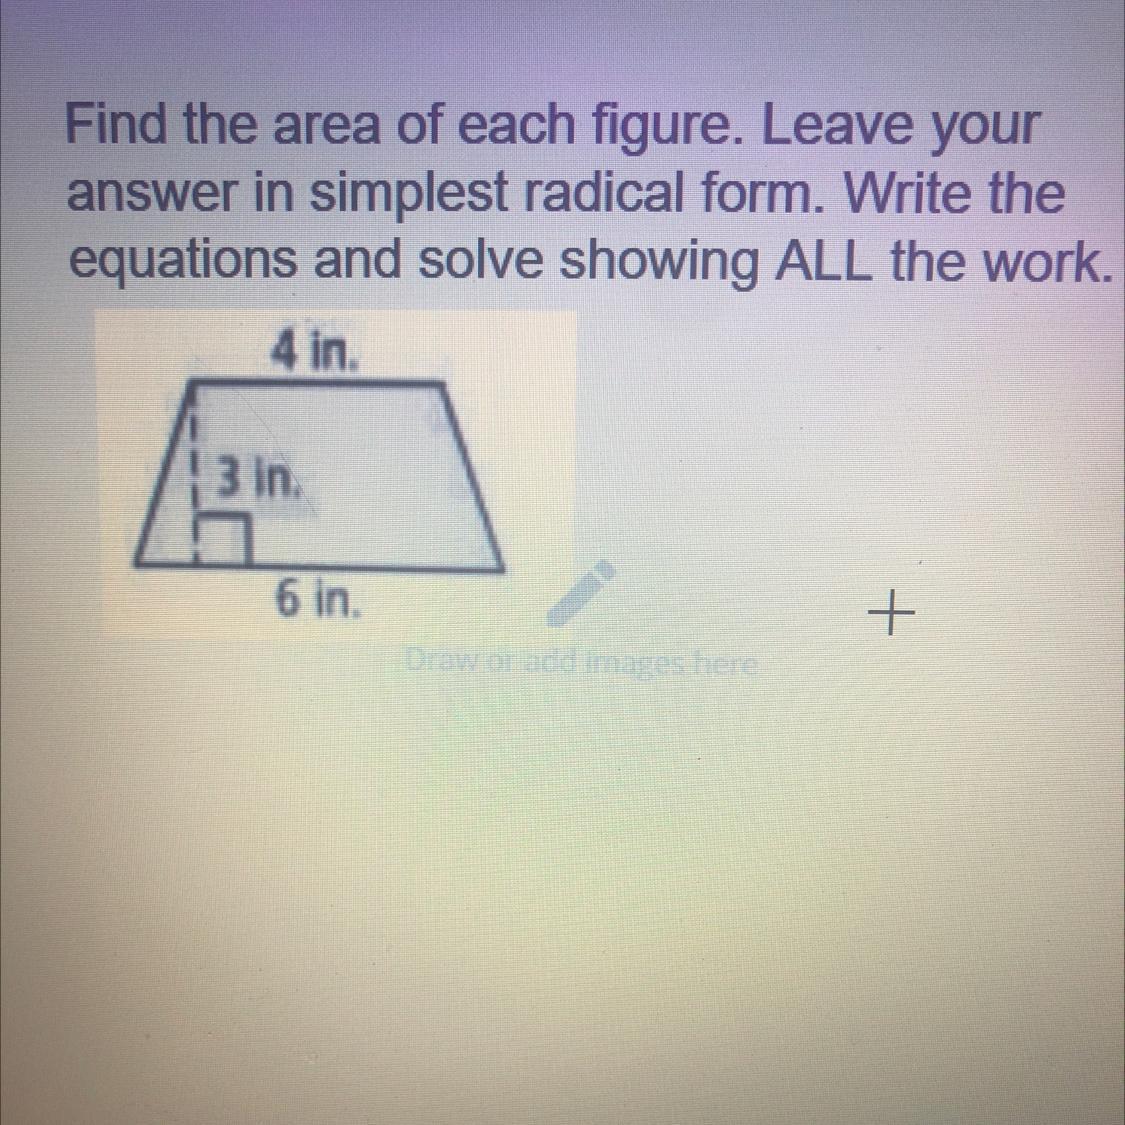 Please Help Me It Would Mean The World. Extra Points!The Answer Is 15in^2 Provided By My Teacher I Just